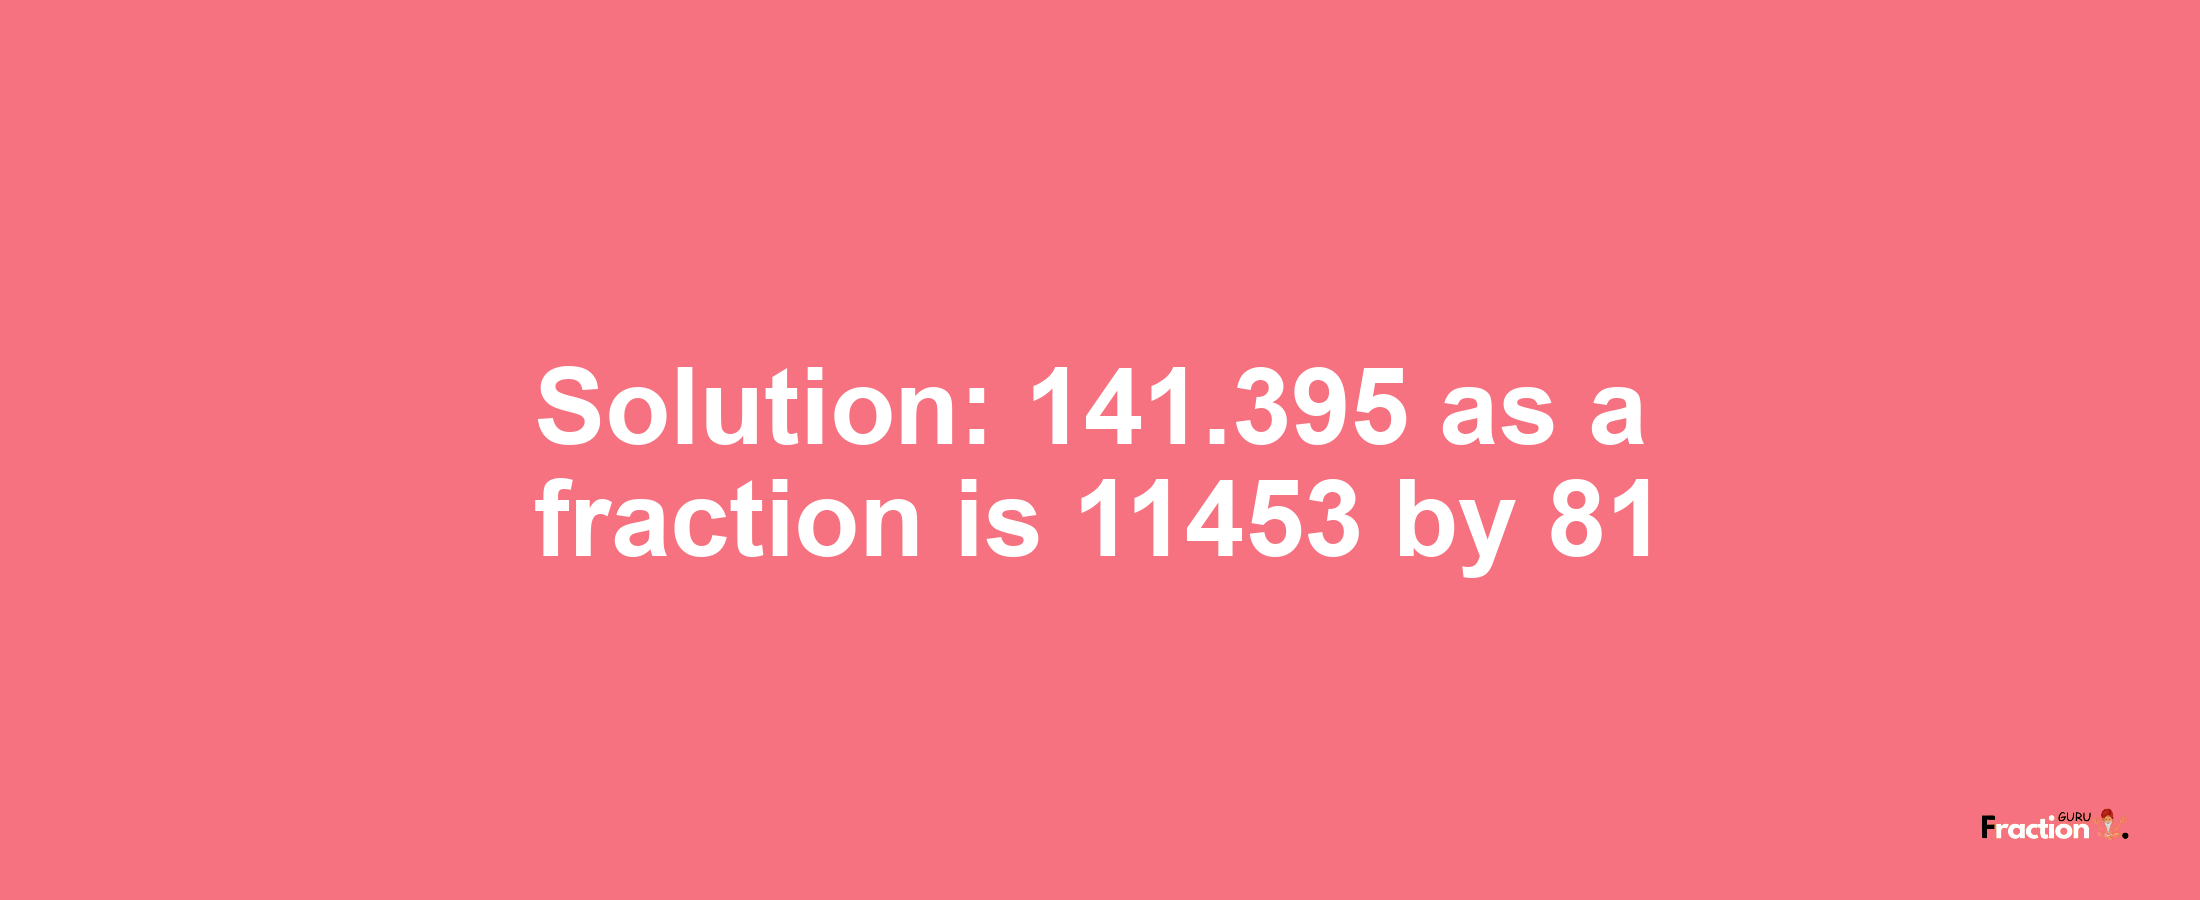 Solution:141.395 as a fraction is 11453/81